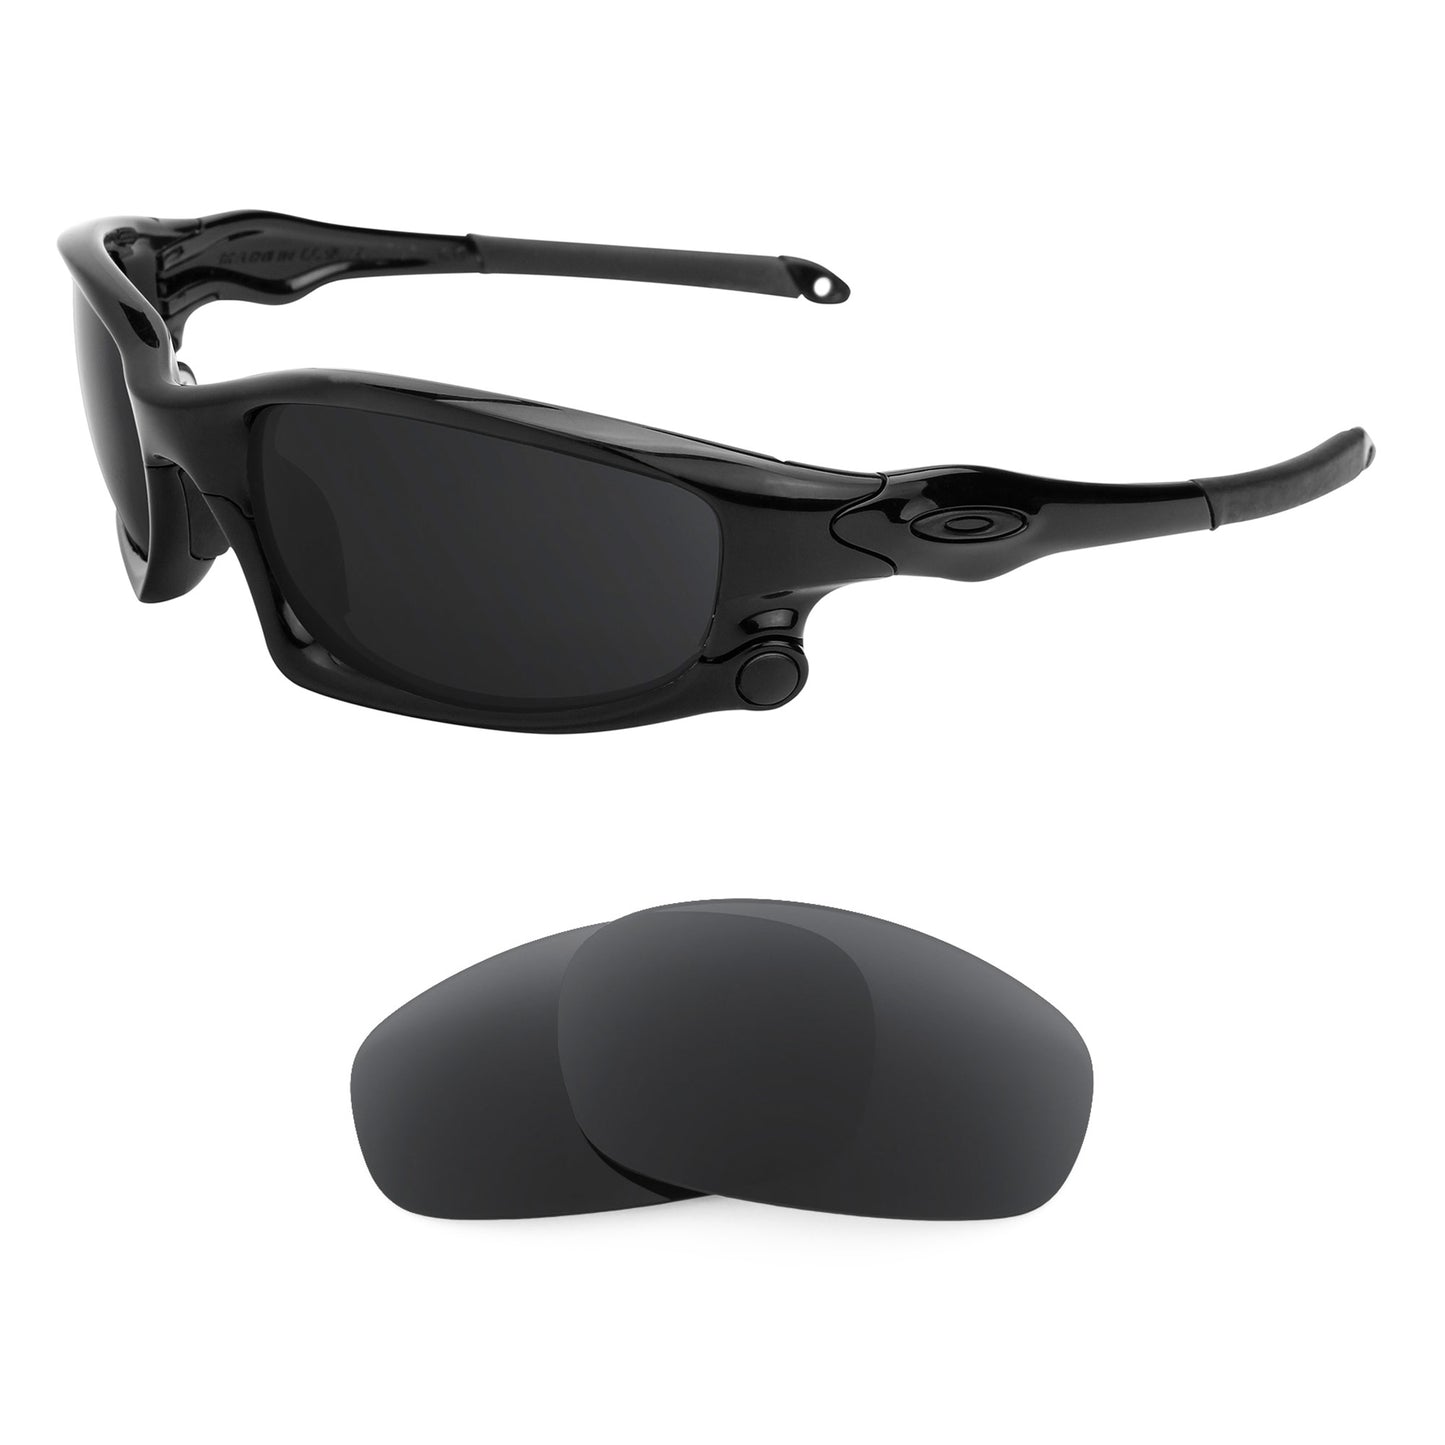 Oakley Split Jacket sunglasses with replacement lenses